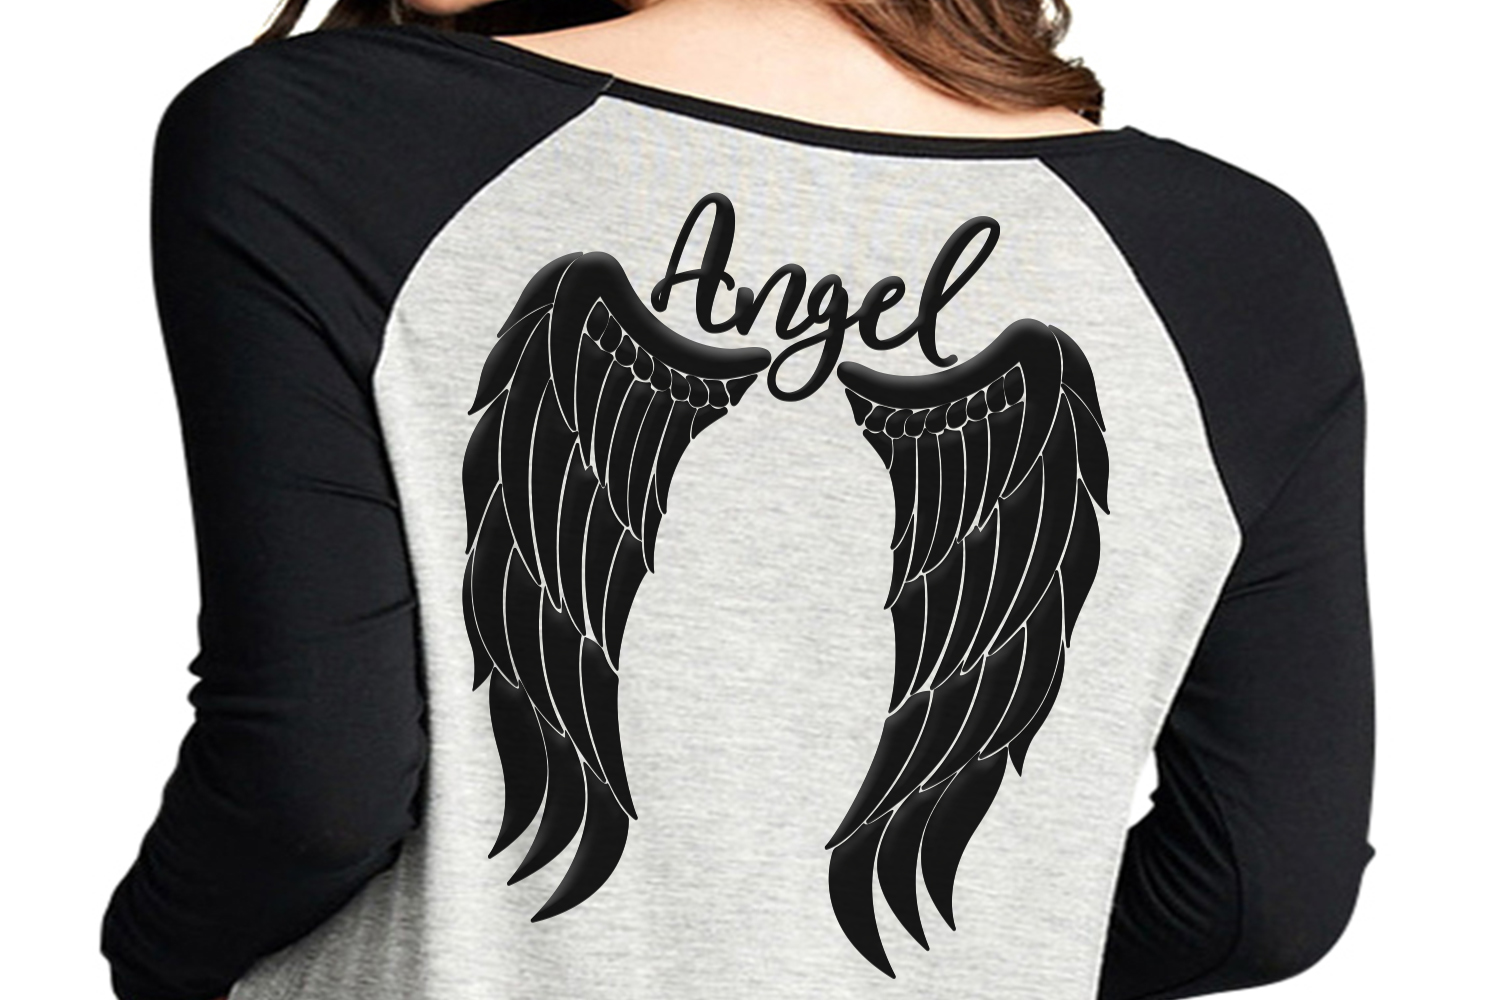 Download Angel wings svg, angel svg, feather wings svg, angel jpg, angel wings shirt design, angel ...